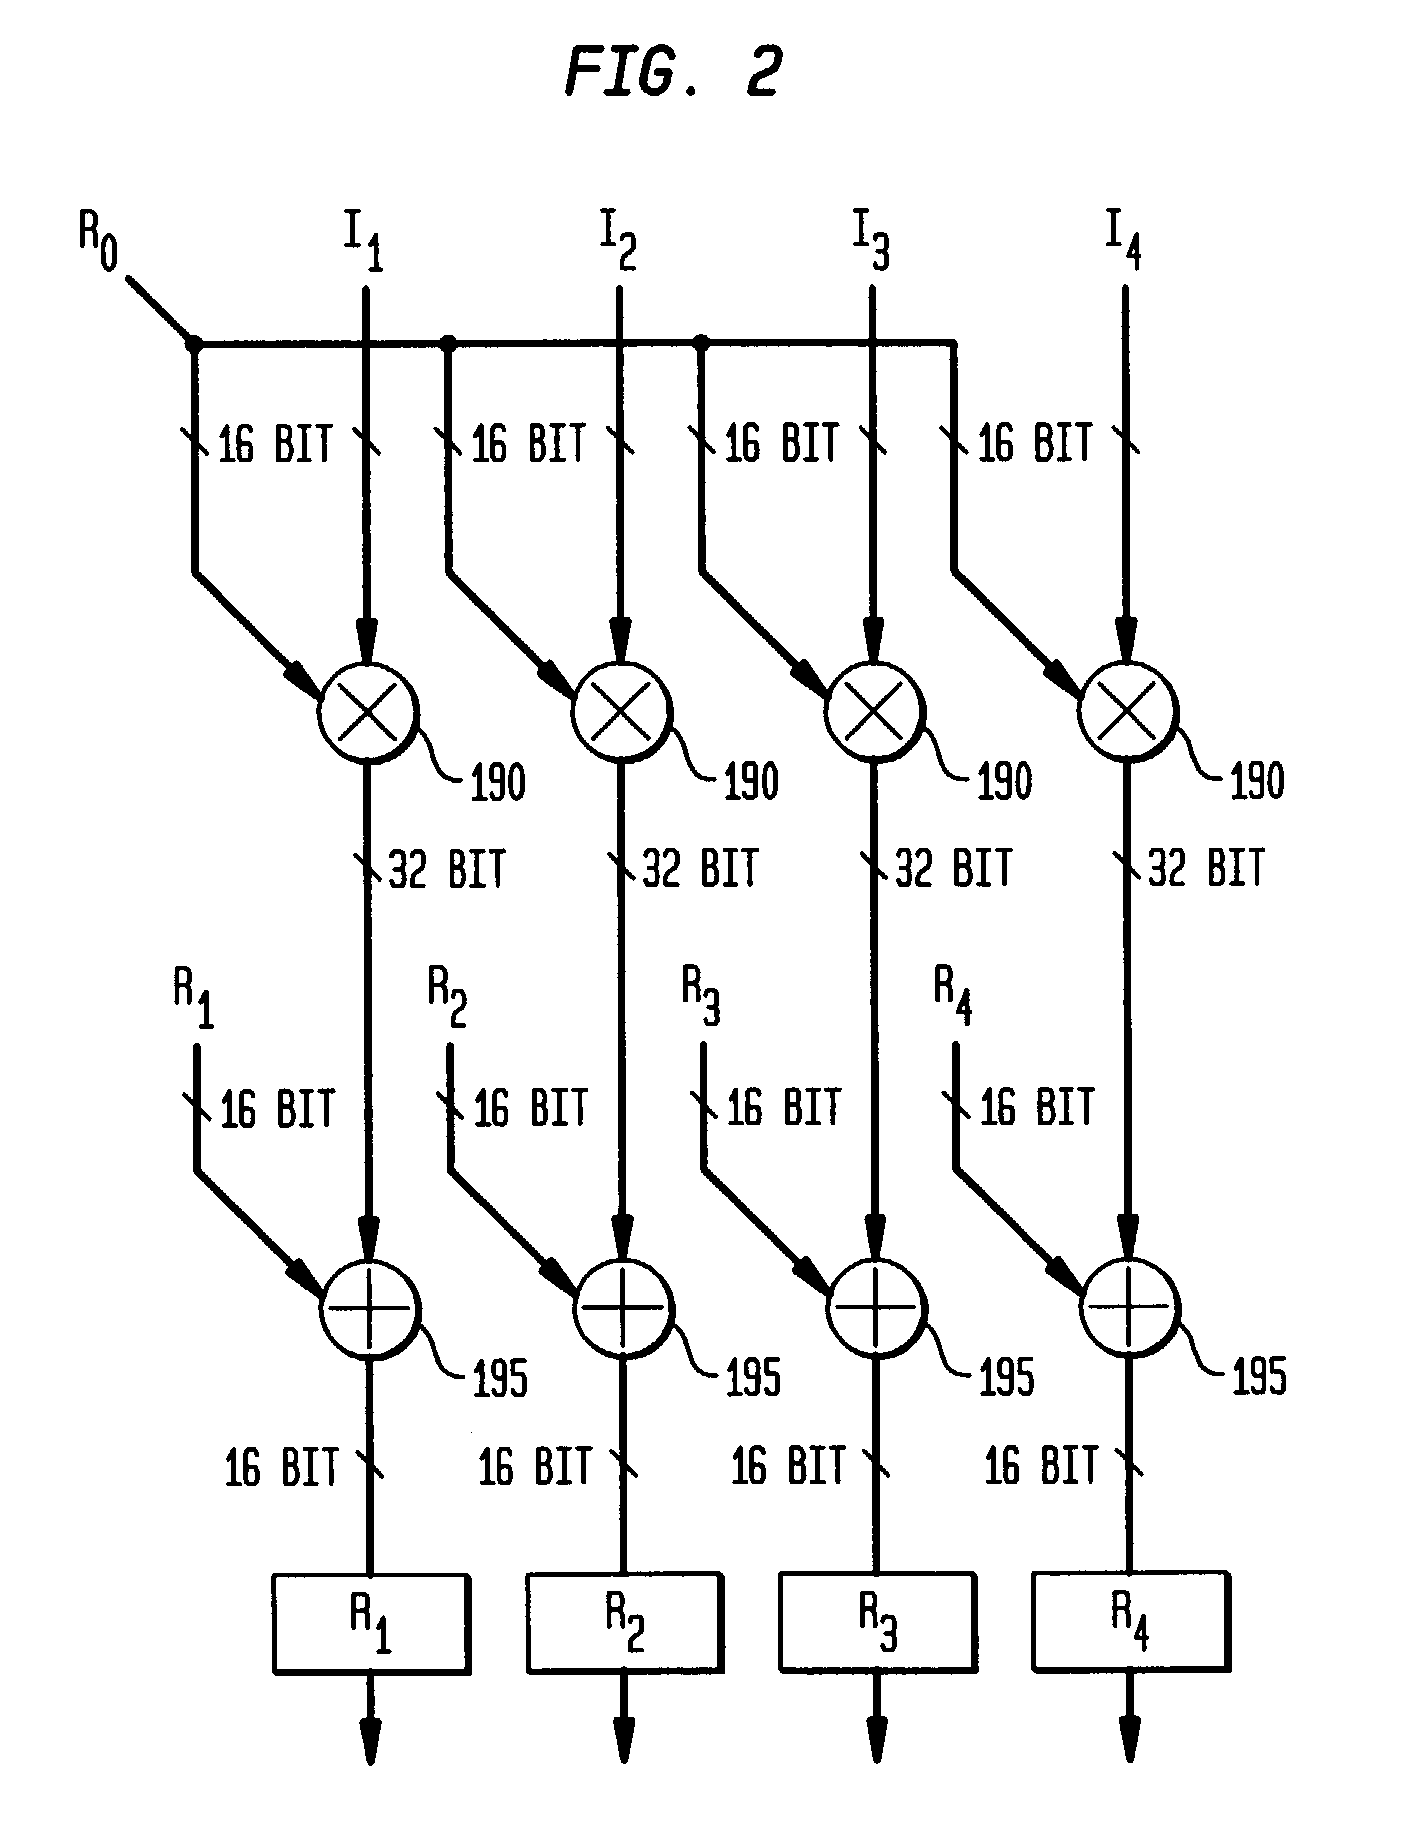 Hierarchical interconnect for configuring separate interconnects for each group of fixed and diverse computational elements